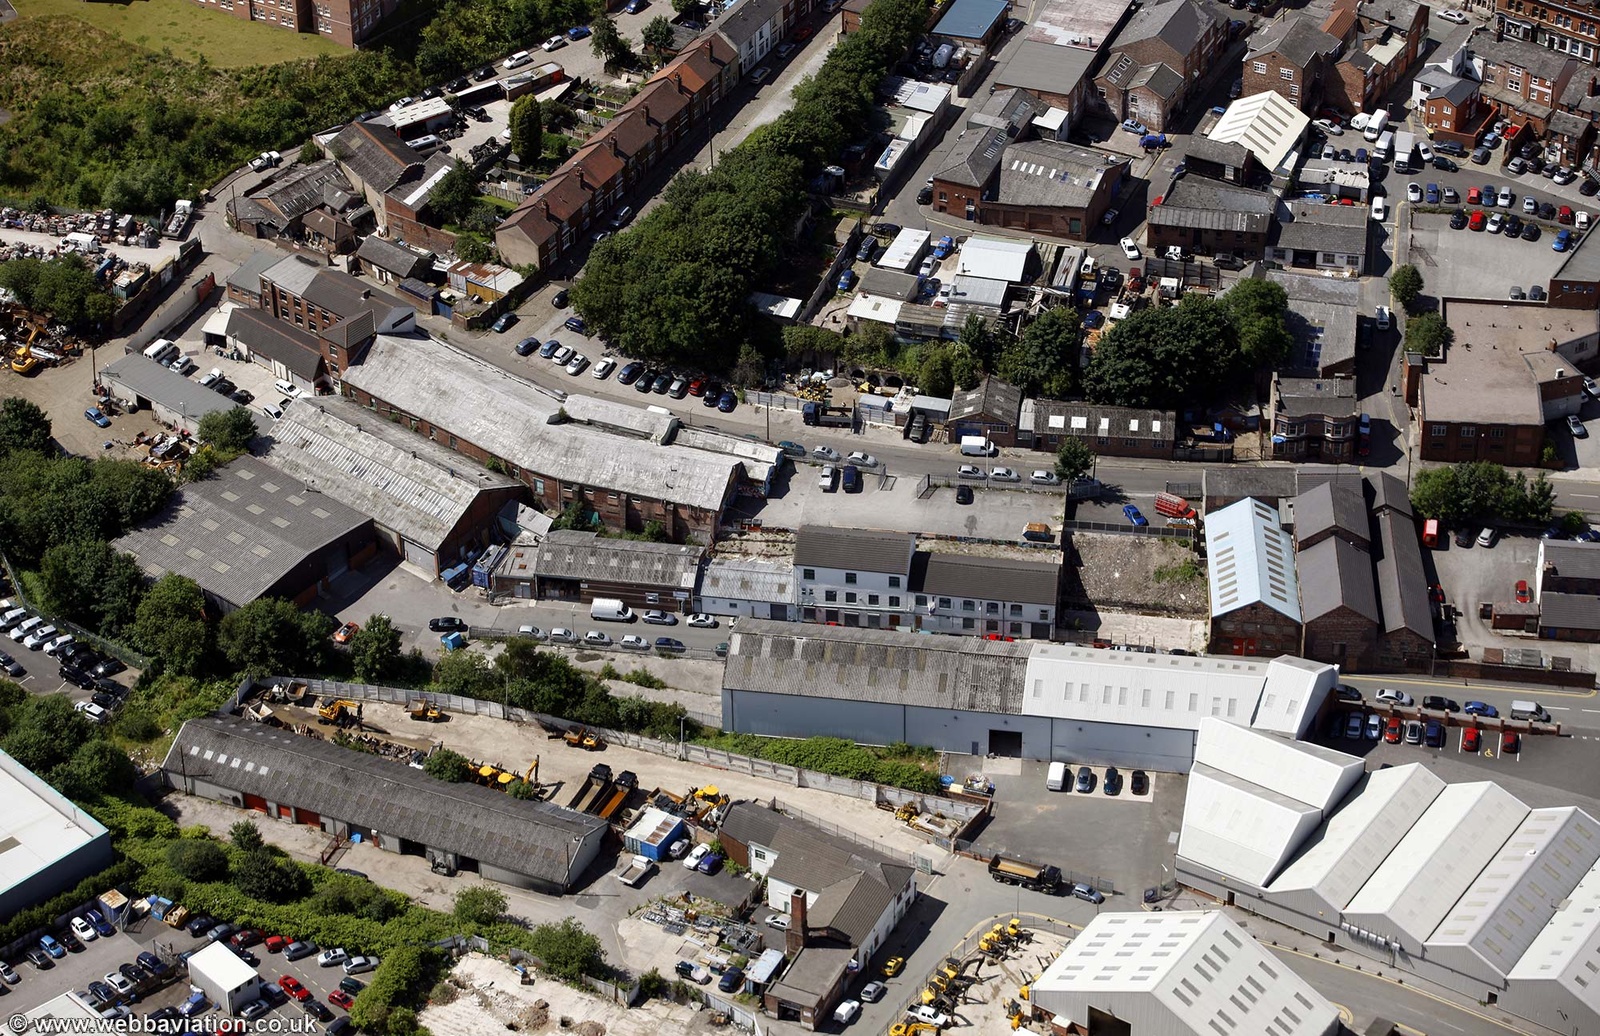 Canal St & Joules St  Stockport from the air